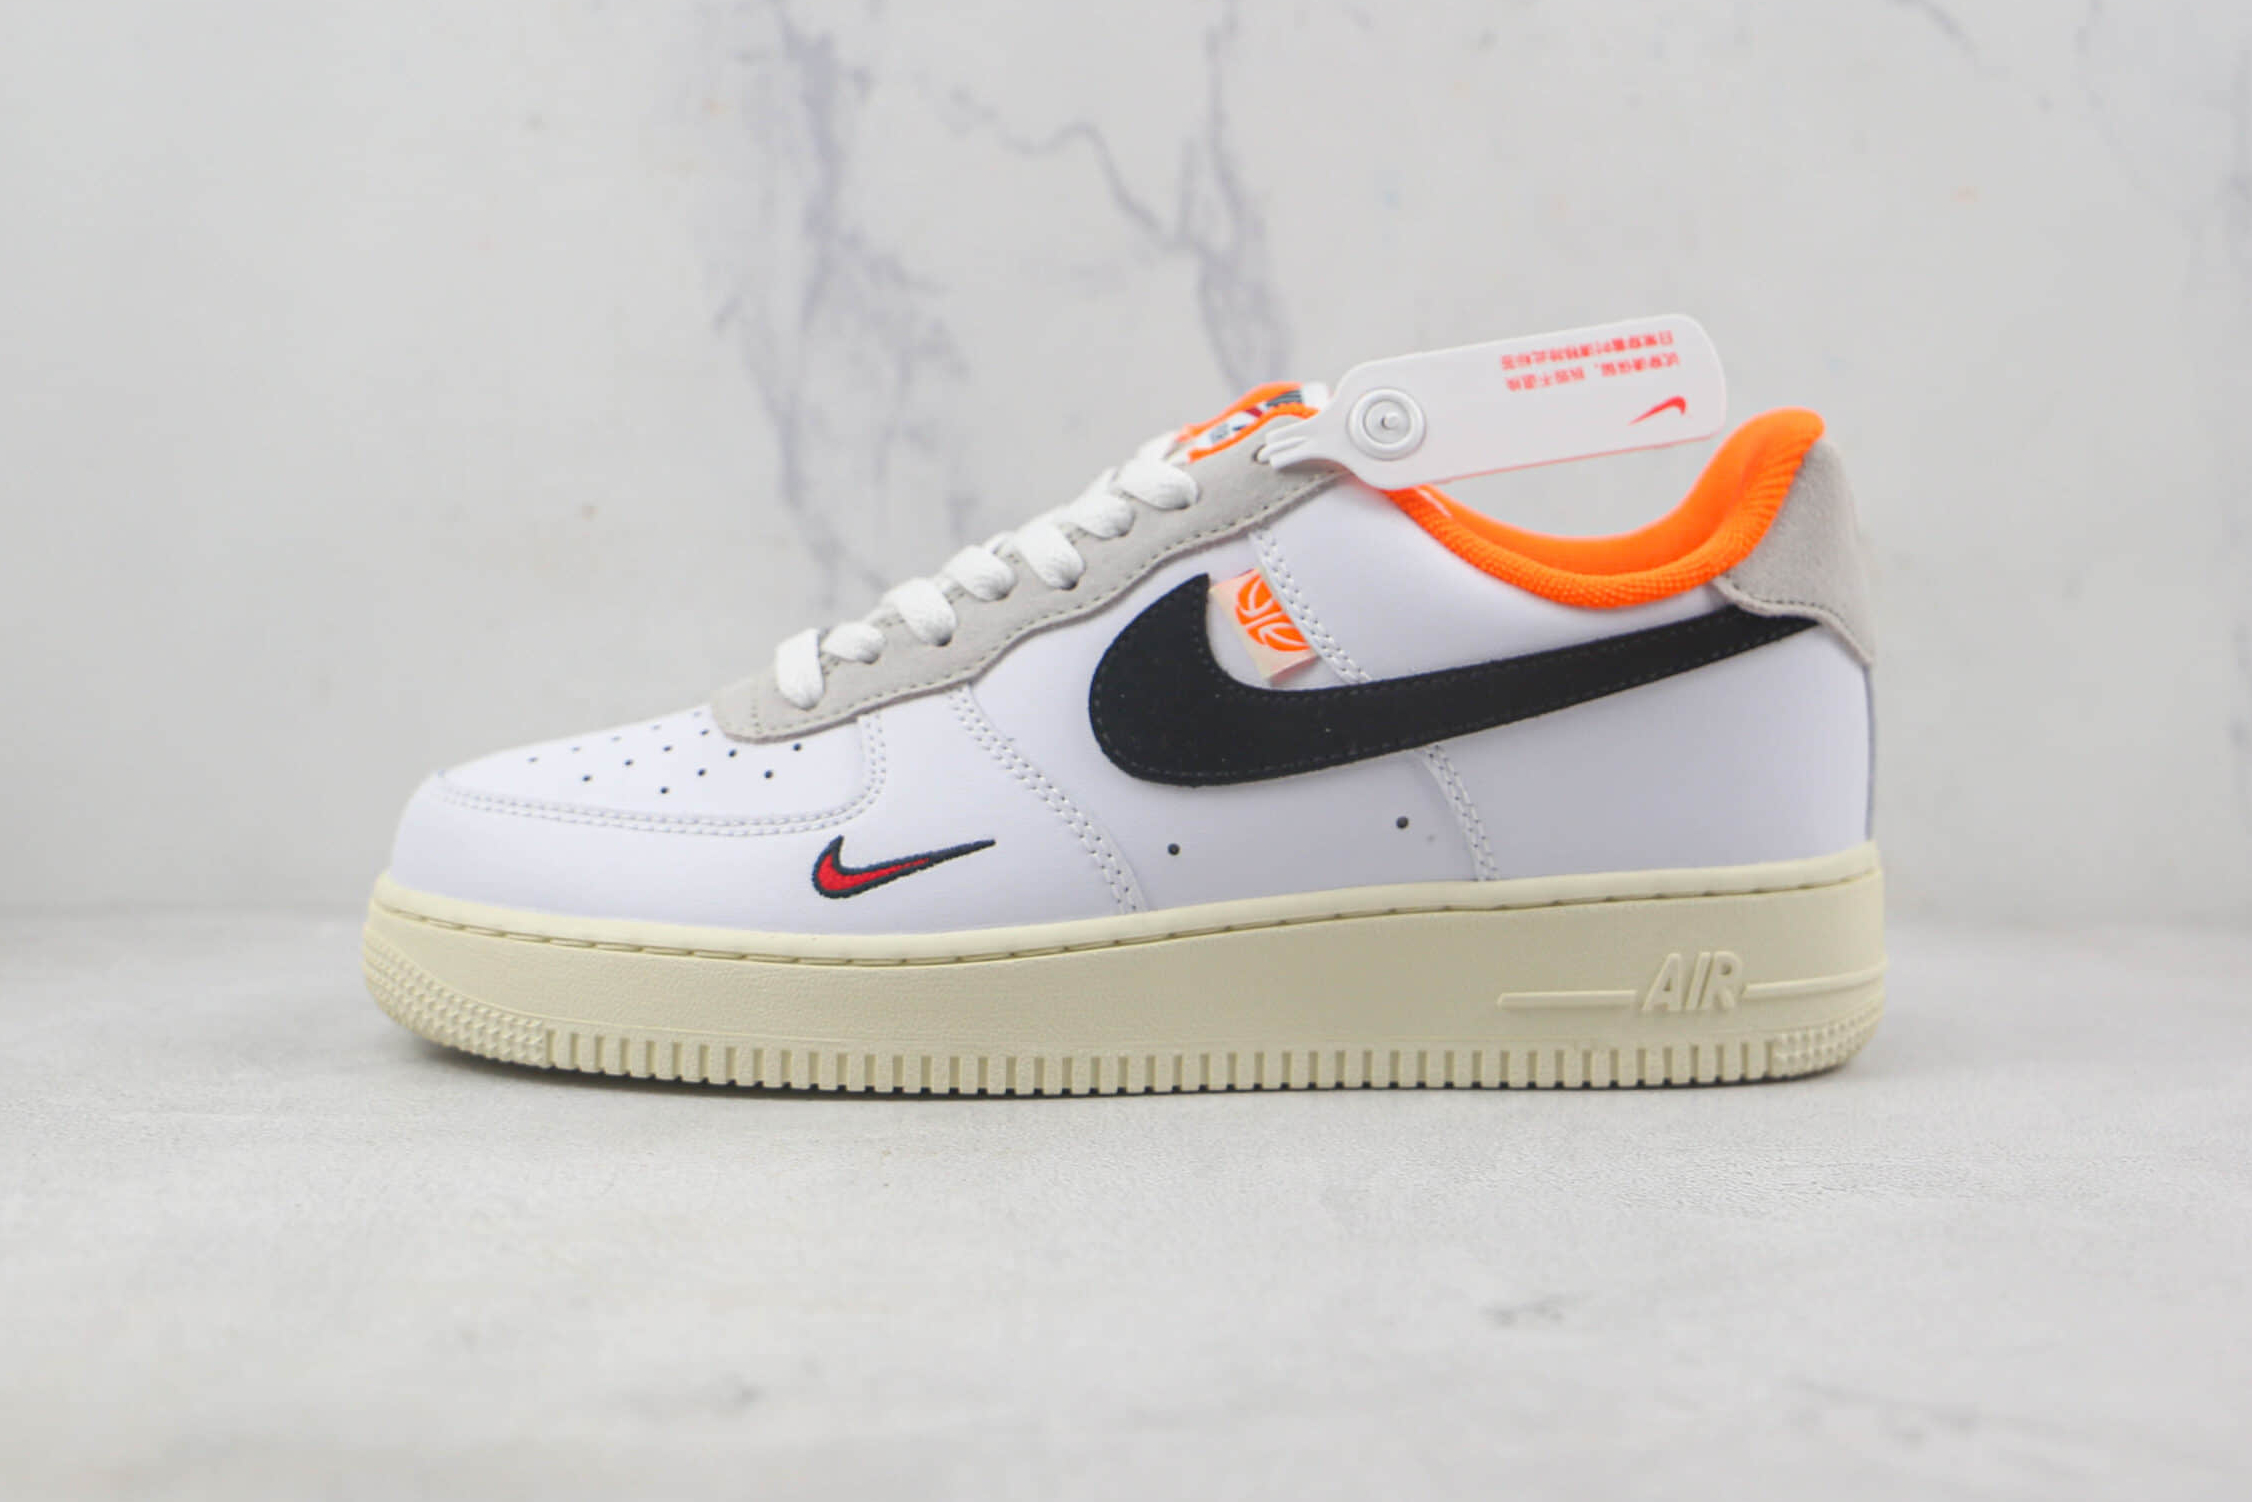 Nike Air Force 1 '07 LV8 'Hoops Pack - White Total Orange' DX3357-100 | Shop Now!